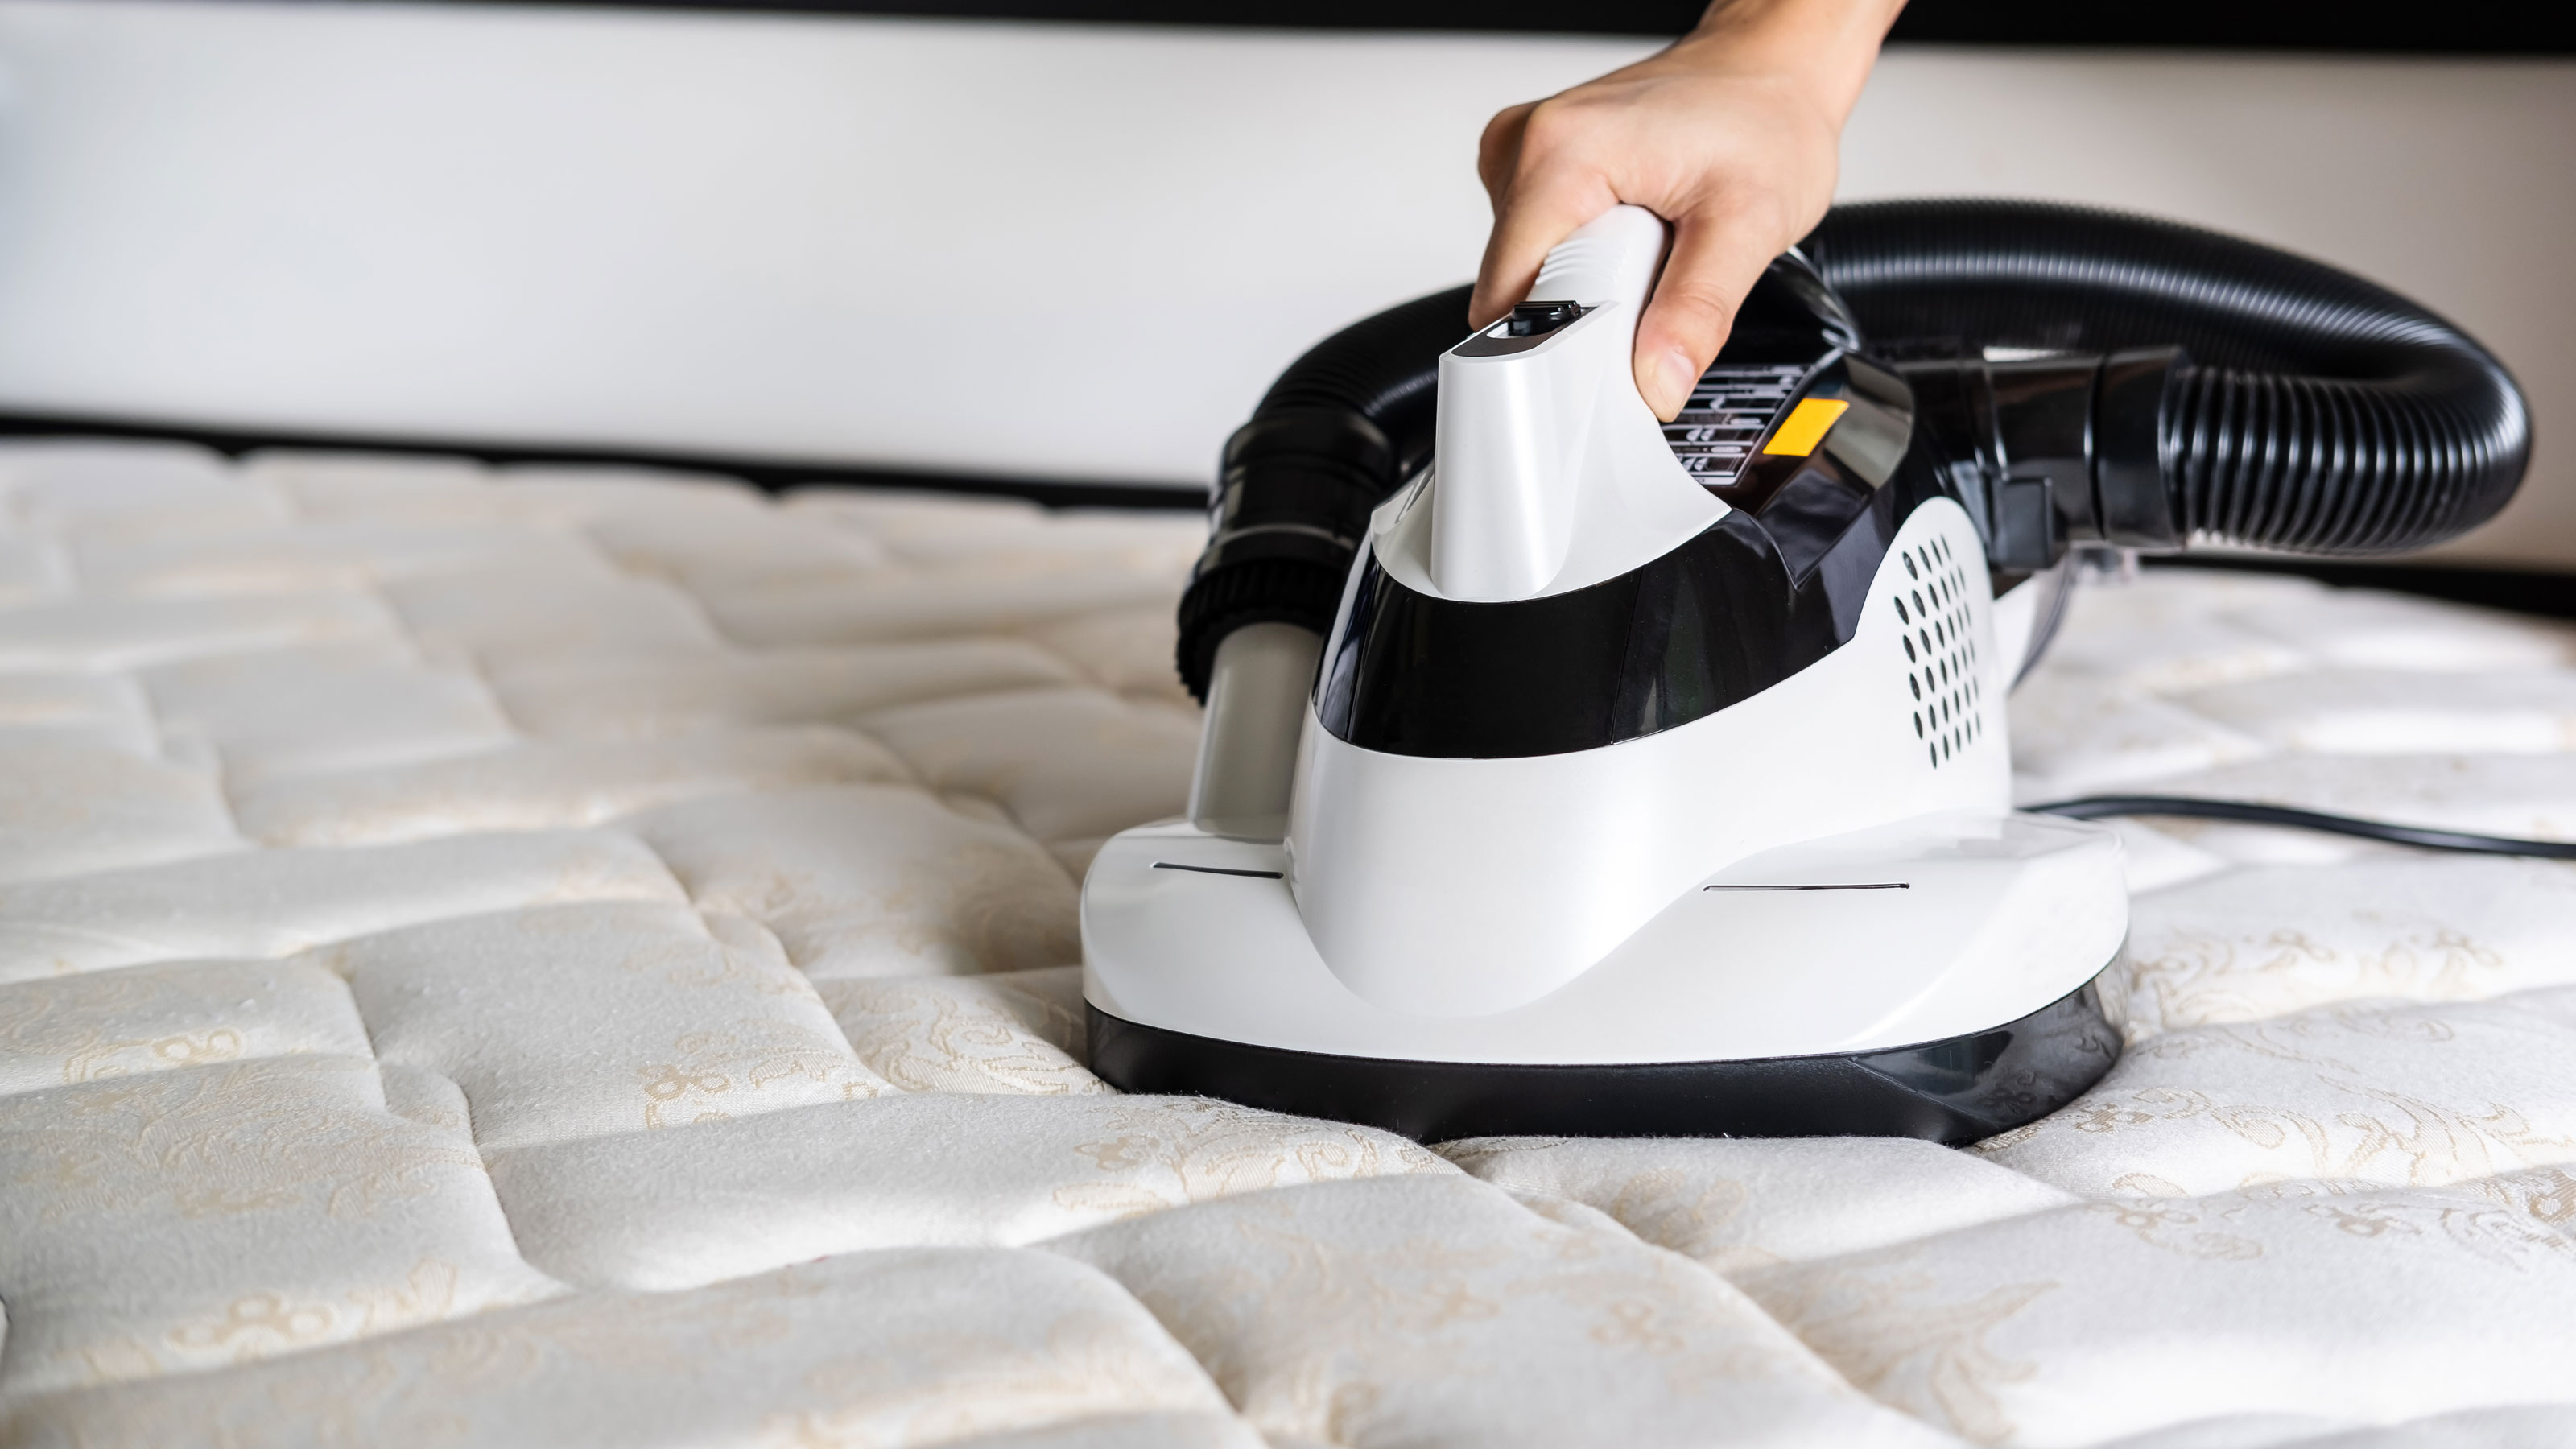 Steam Mattress Cleaning Machines for Bed Bugs Removal 